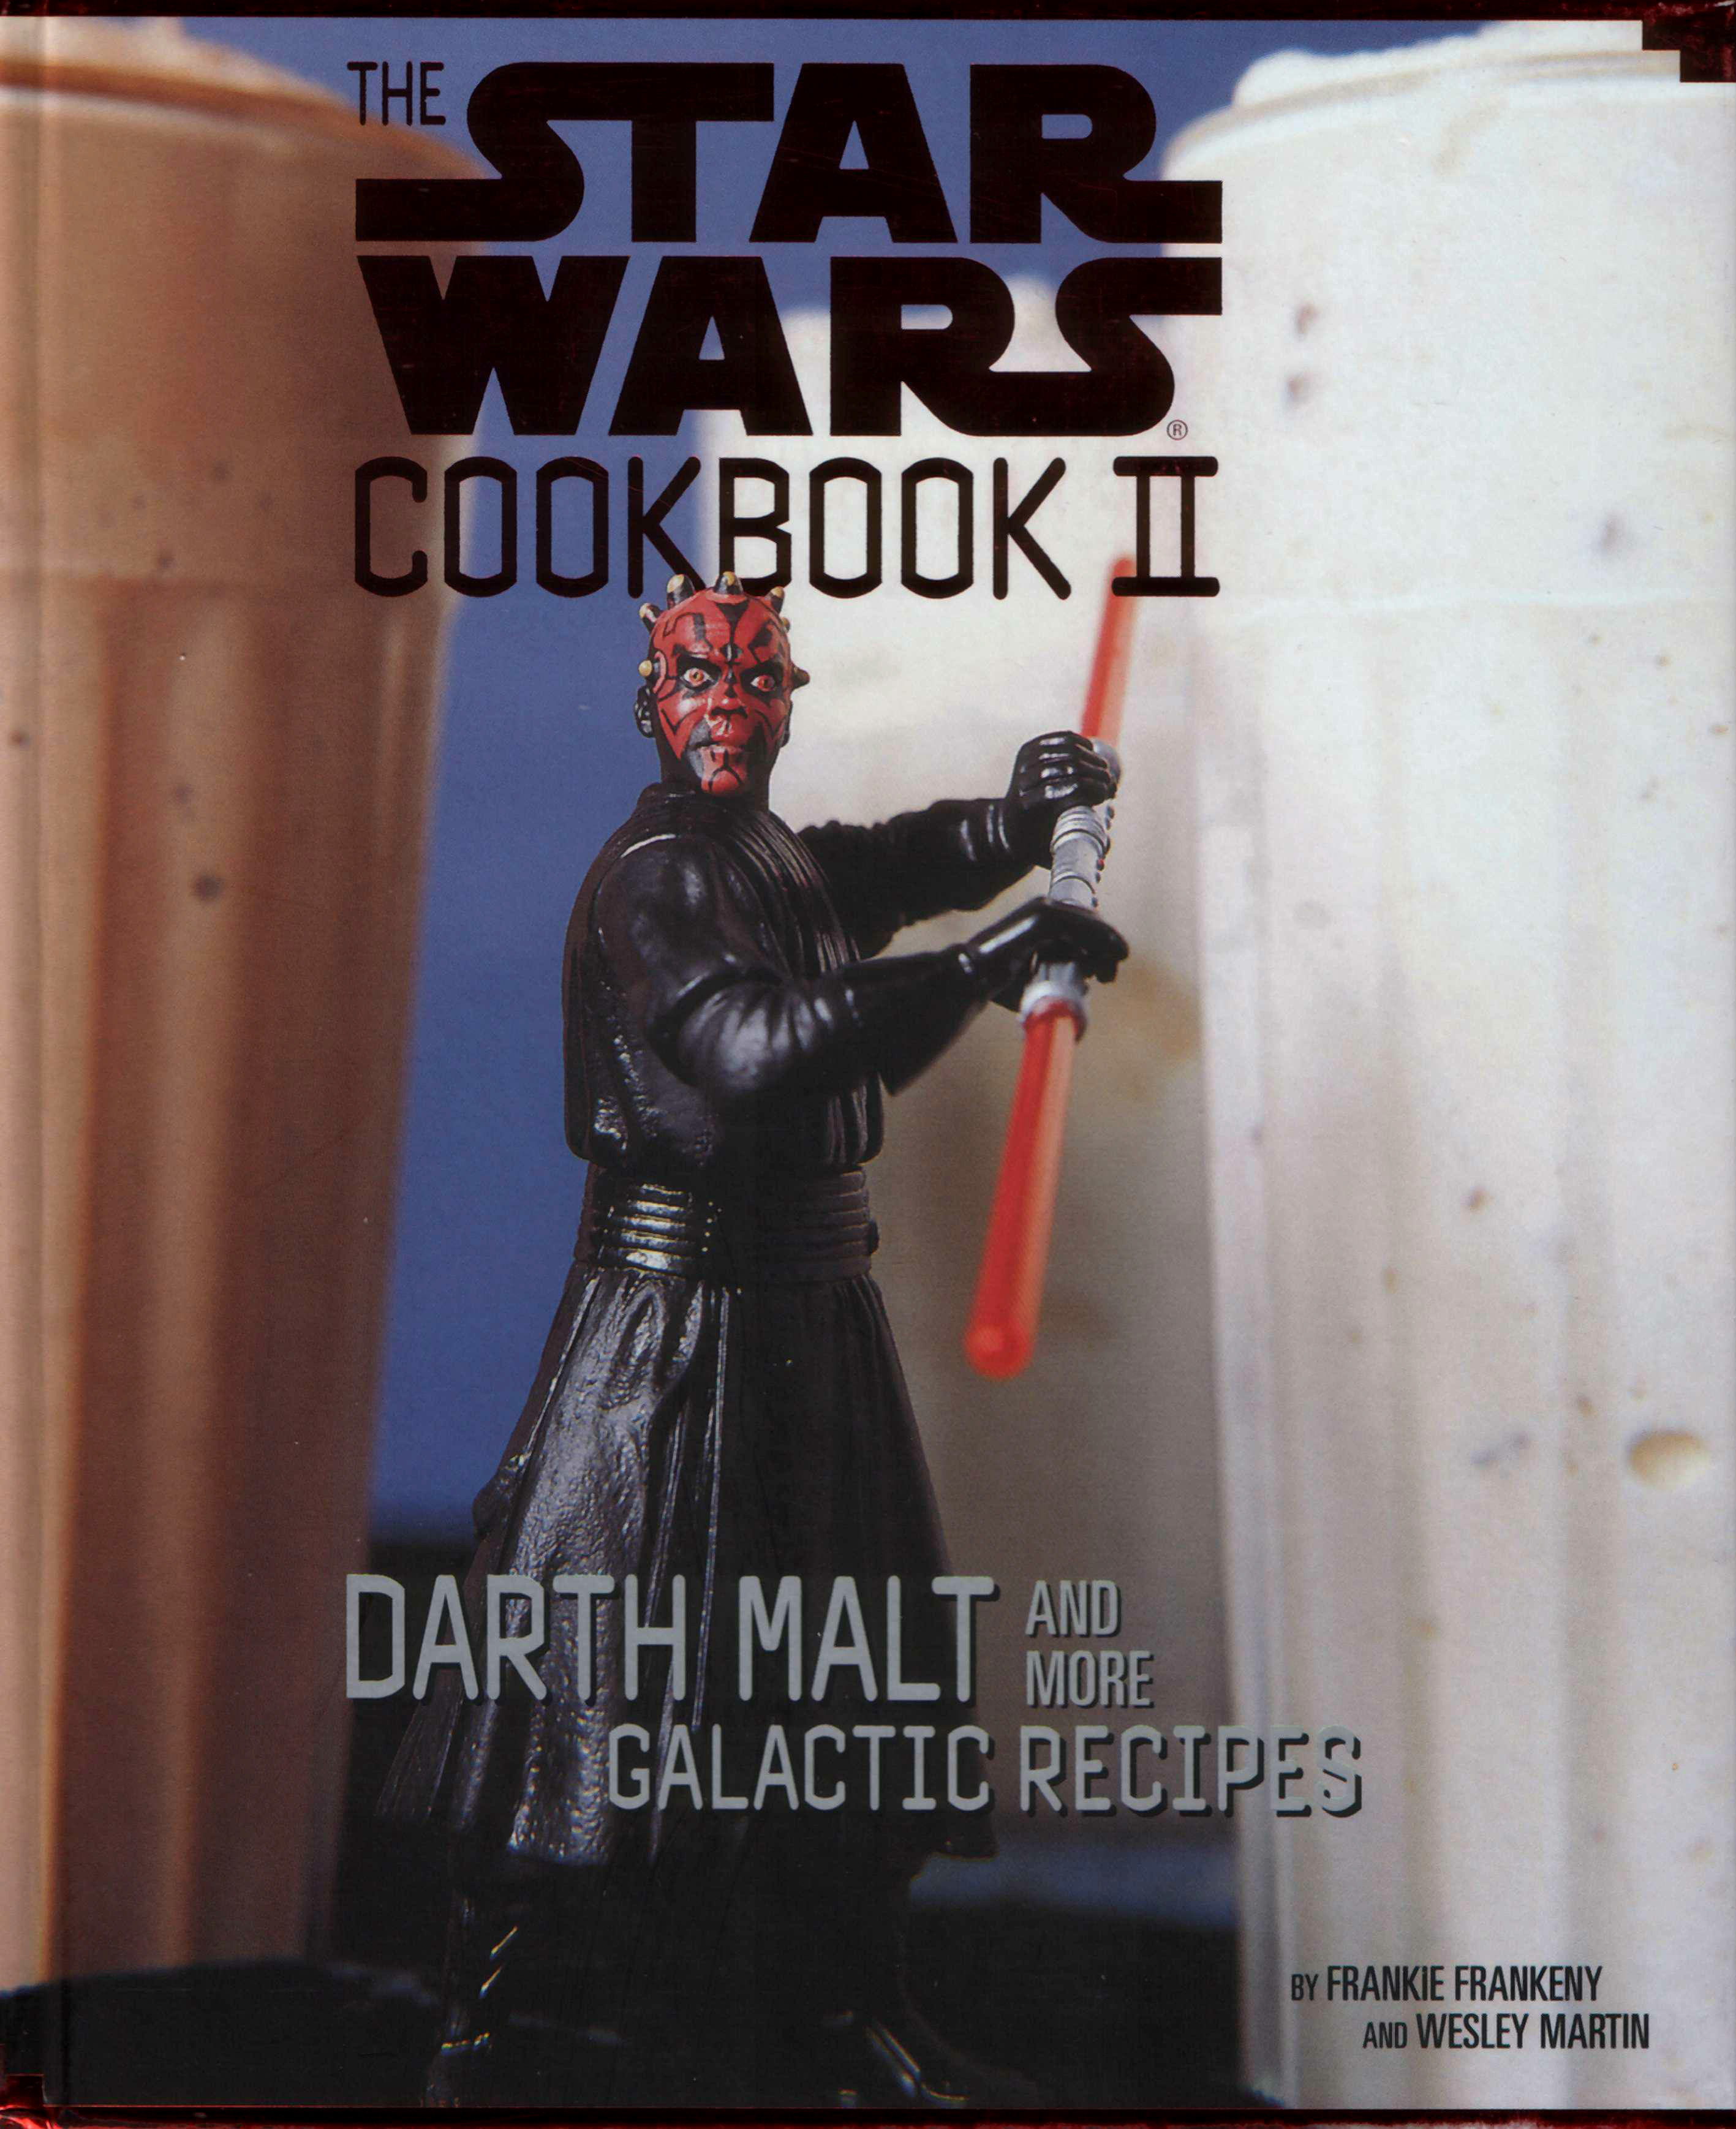 The Star Wars Cookbook II: Darth Malt and More Galactic Recipes (2000) Cover